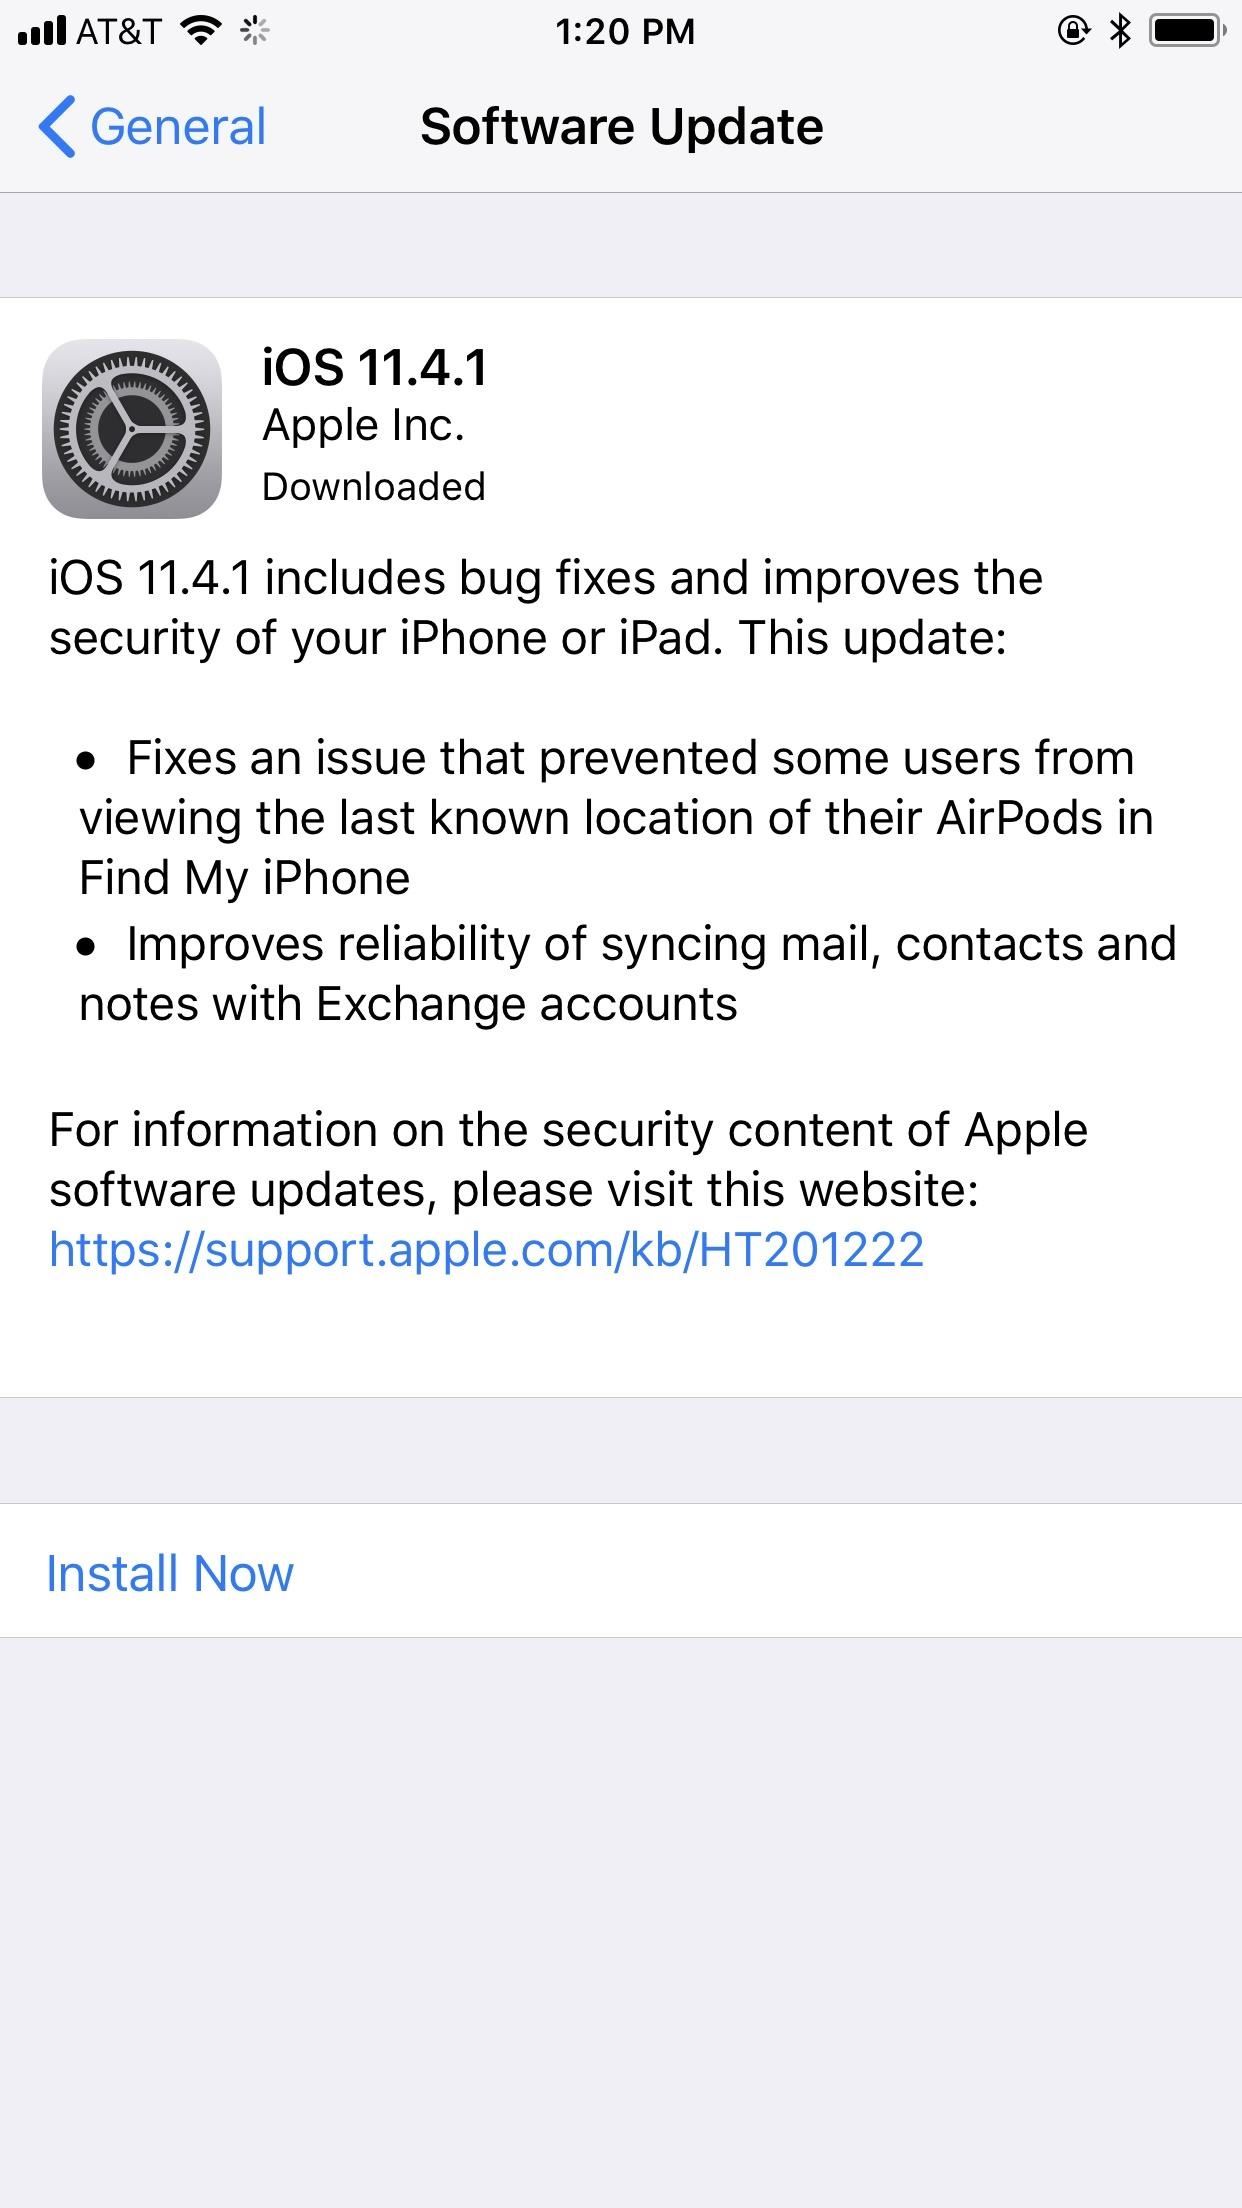 Just Released: iOS 11.4.1 for iPhones Includes More Secure USB Restricted Mode, Bug Fixes & Improvements